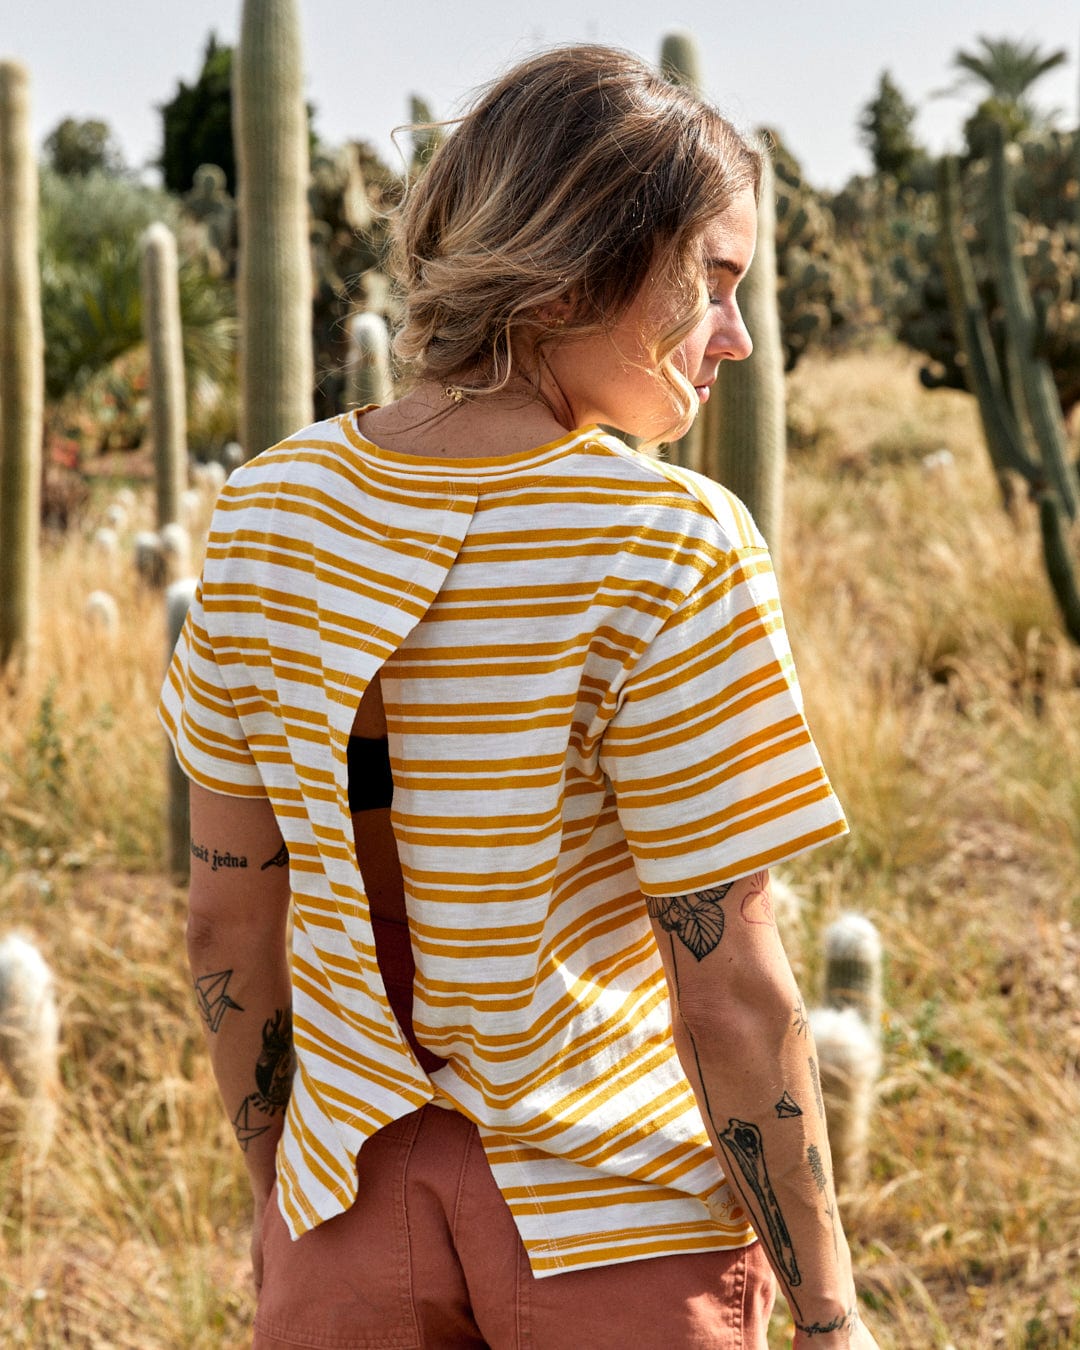 A woman in a Sky - Womens Short Sleeve T-Shirt - Yellow and white shirt and brown pants stands in a cactus field, seen from behind, looking to the side.